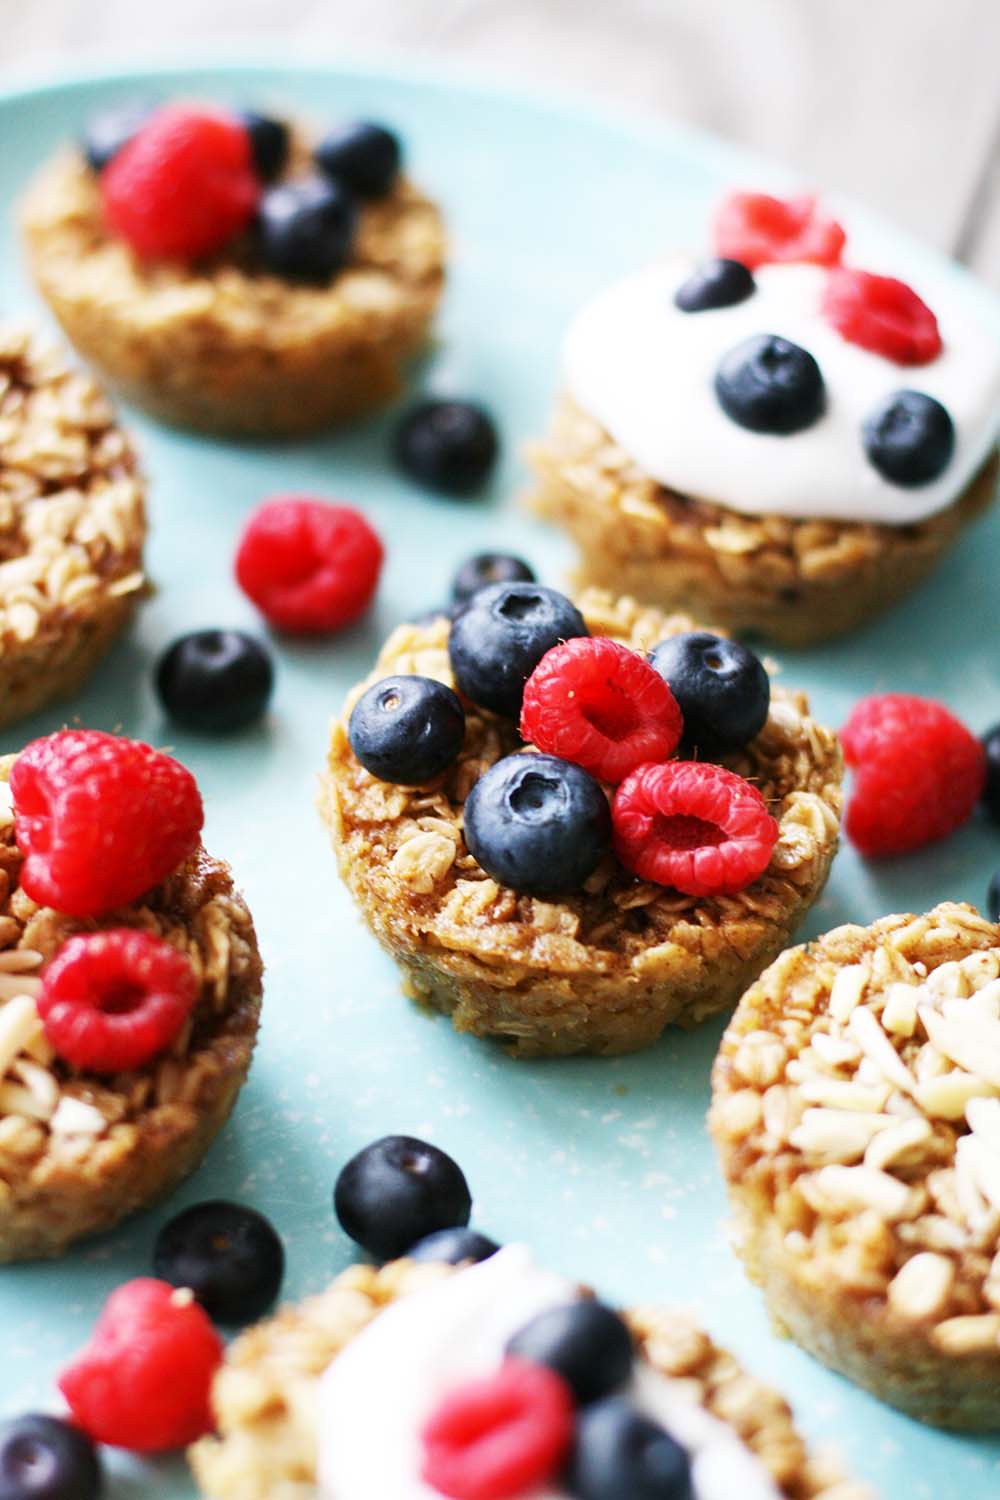 Baked oatmeal cups: Individual baked oatmeal cups can be flavored and topped with a variety of ingredients.